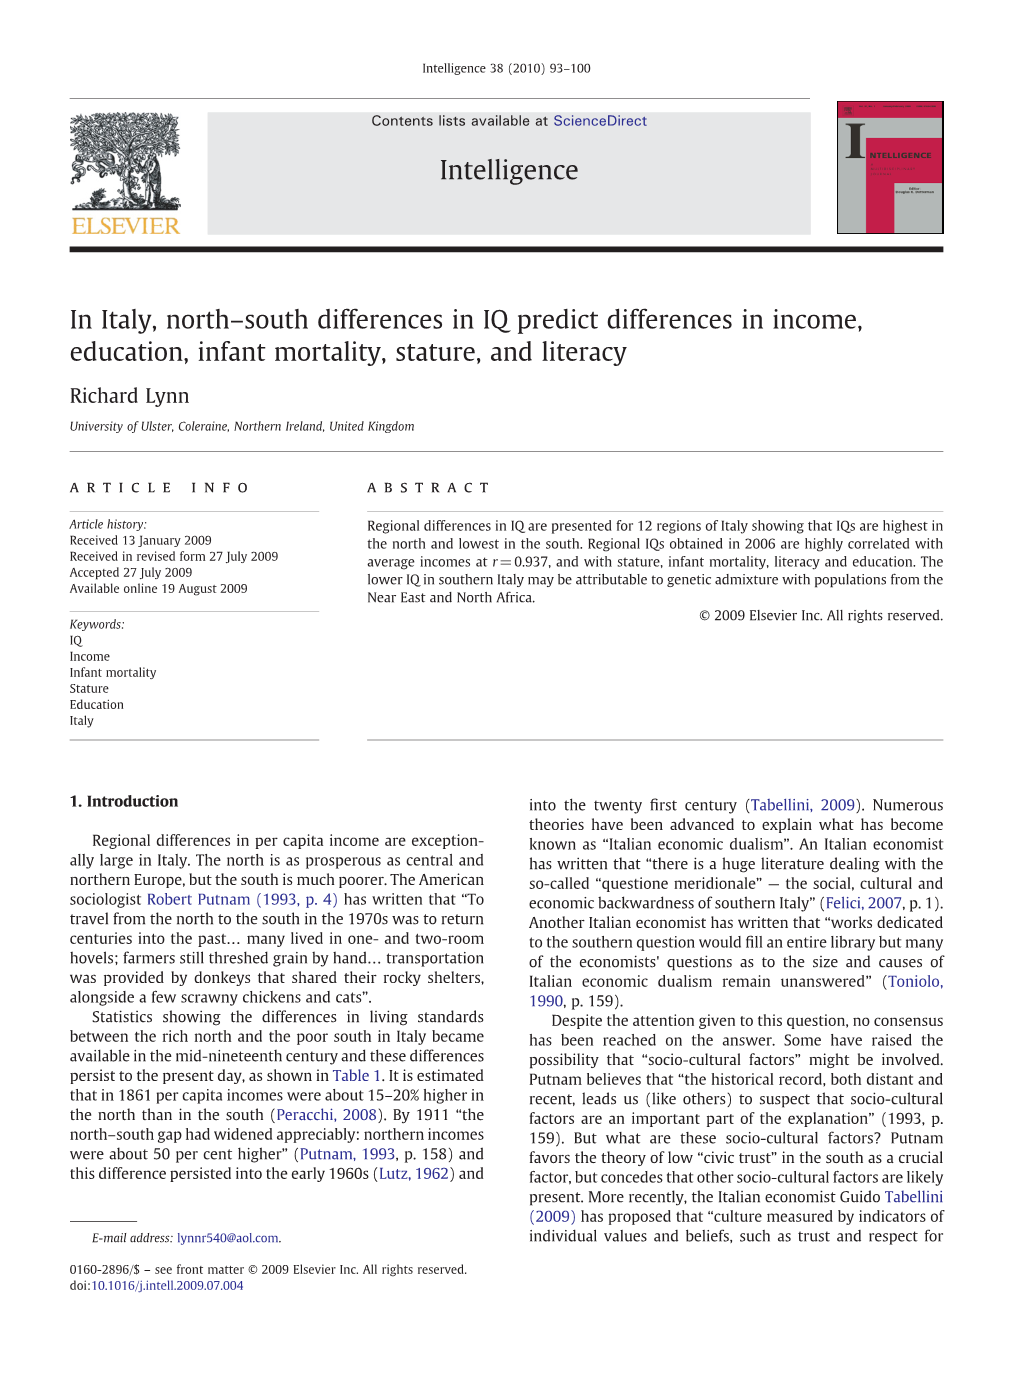 In Italy, North–South Differences in IQ Predict Differences in Income, Education, Infant Mortality, Stature, and Literacy